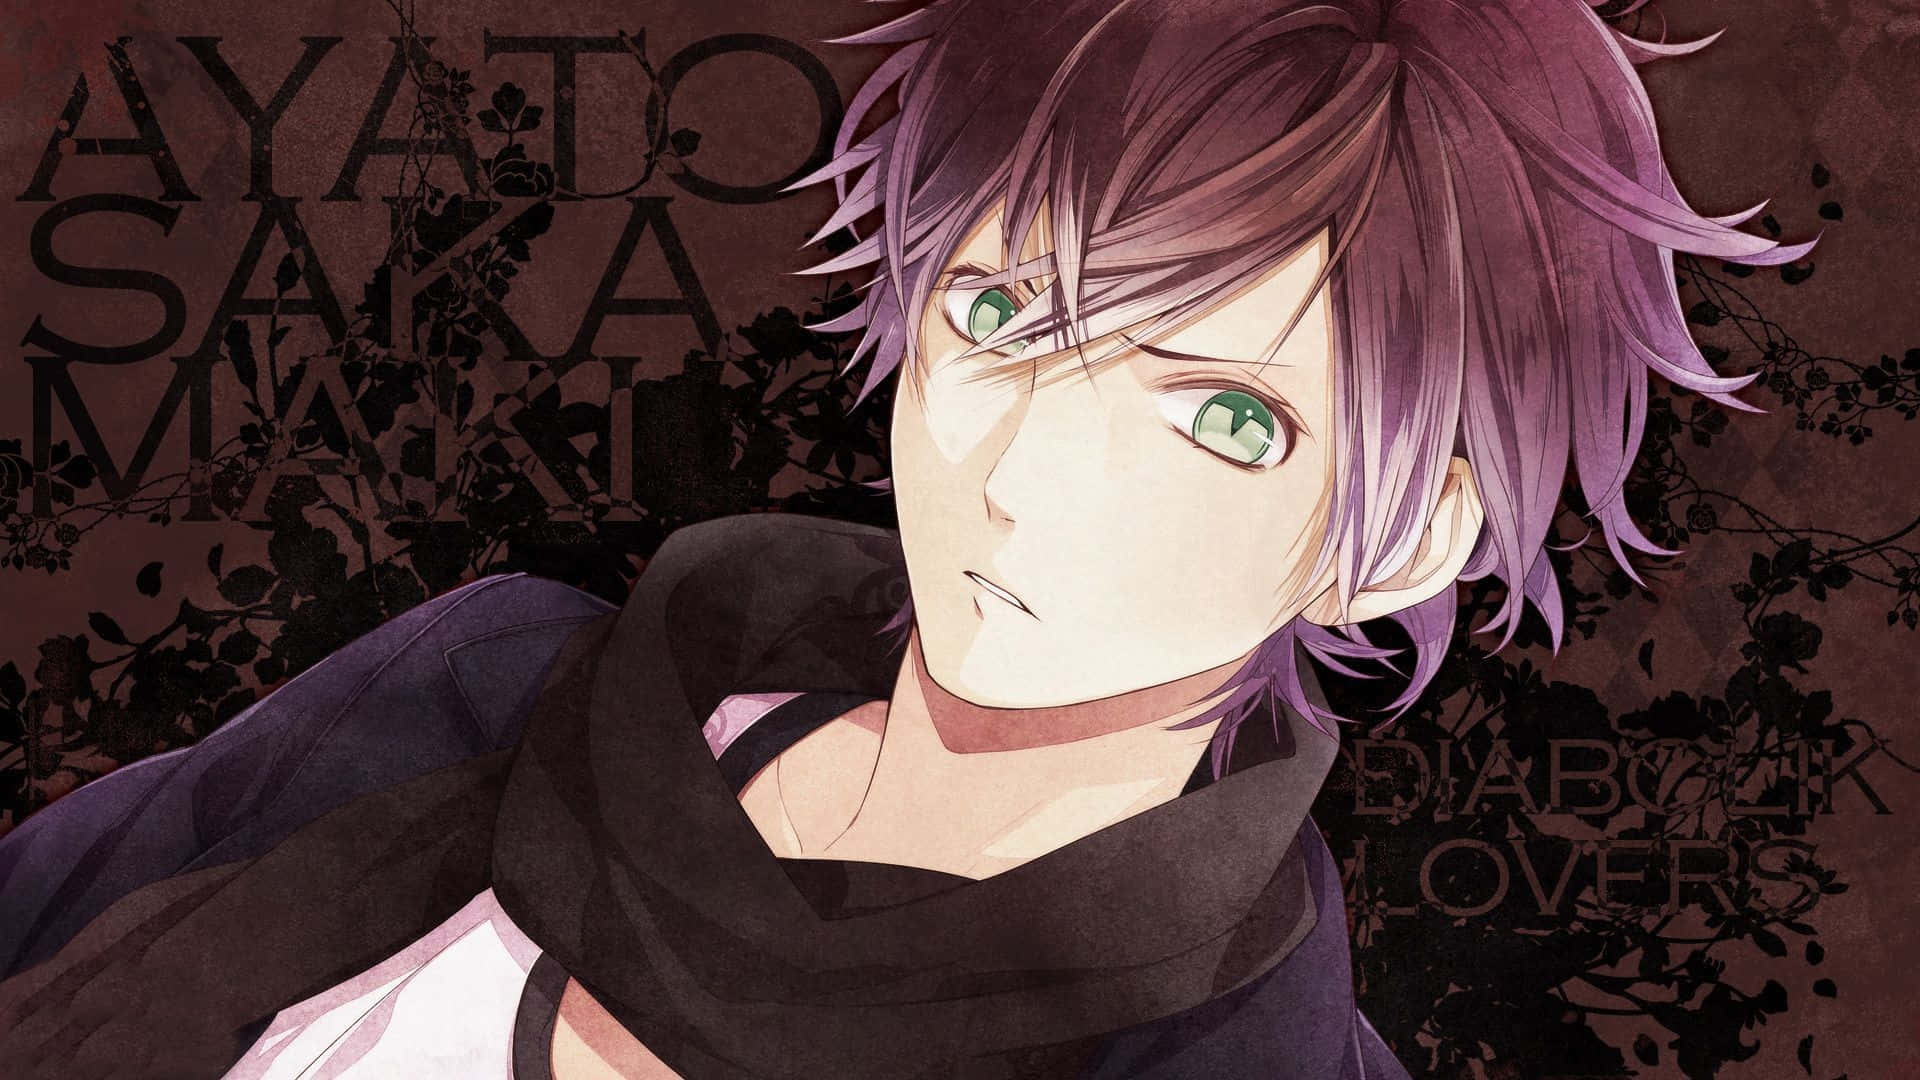 Image  Yuri Ayato, a mysterious delinquent with supernatural powers Wallpaper